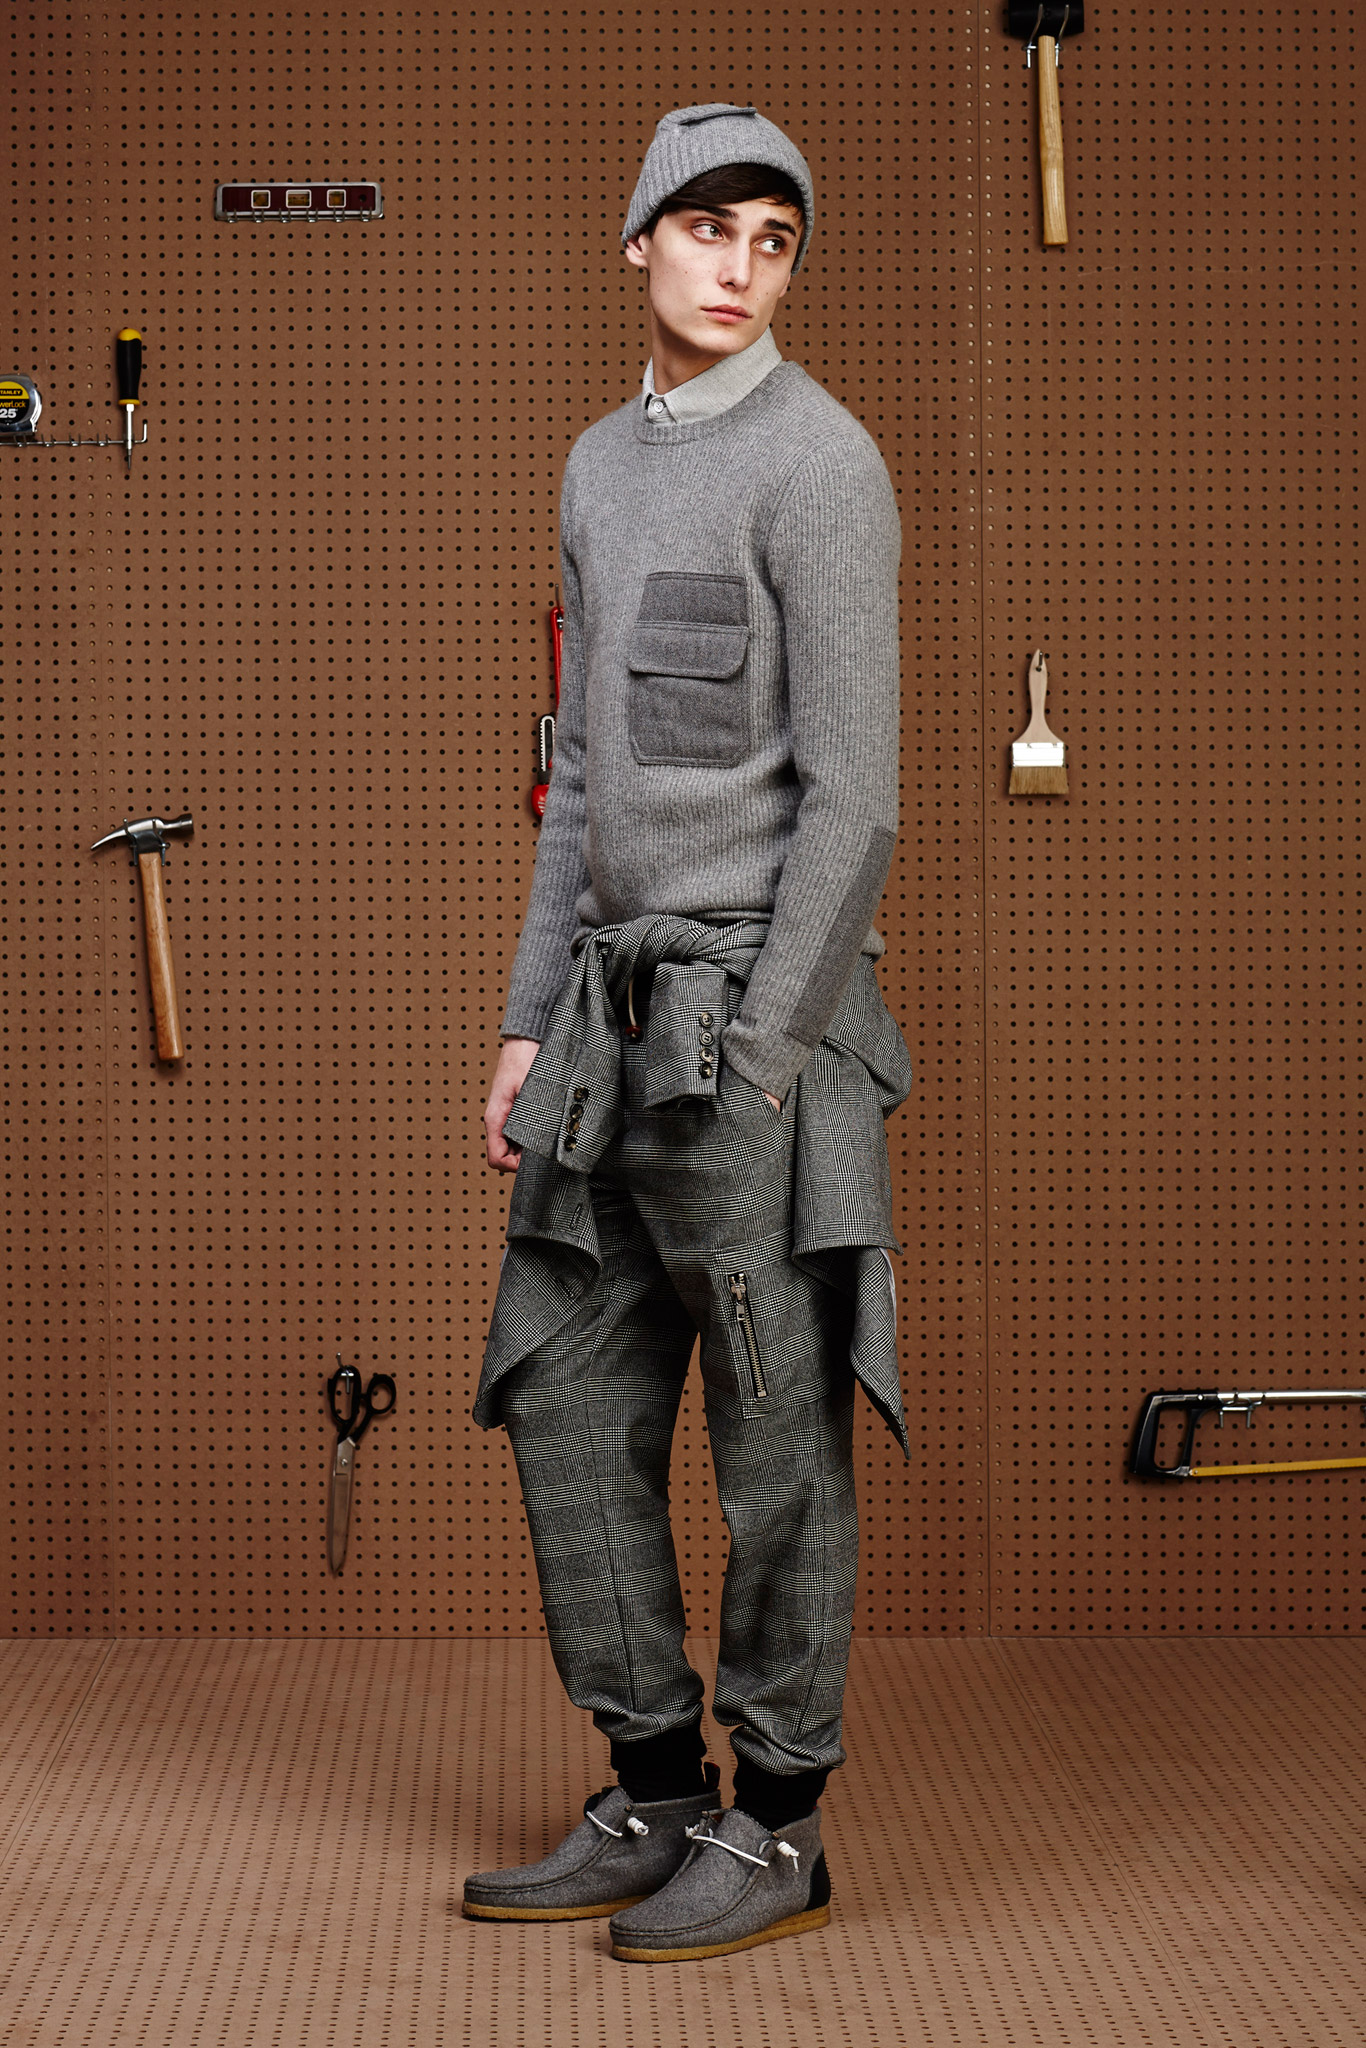 Band of Outsiders Fall/Winter 2015 Collection